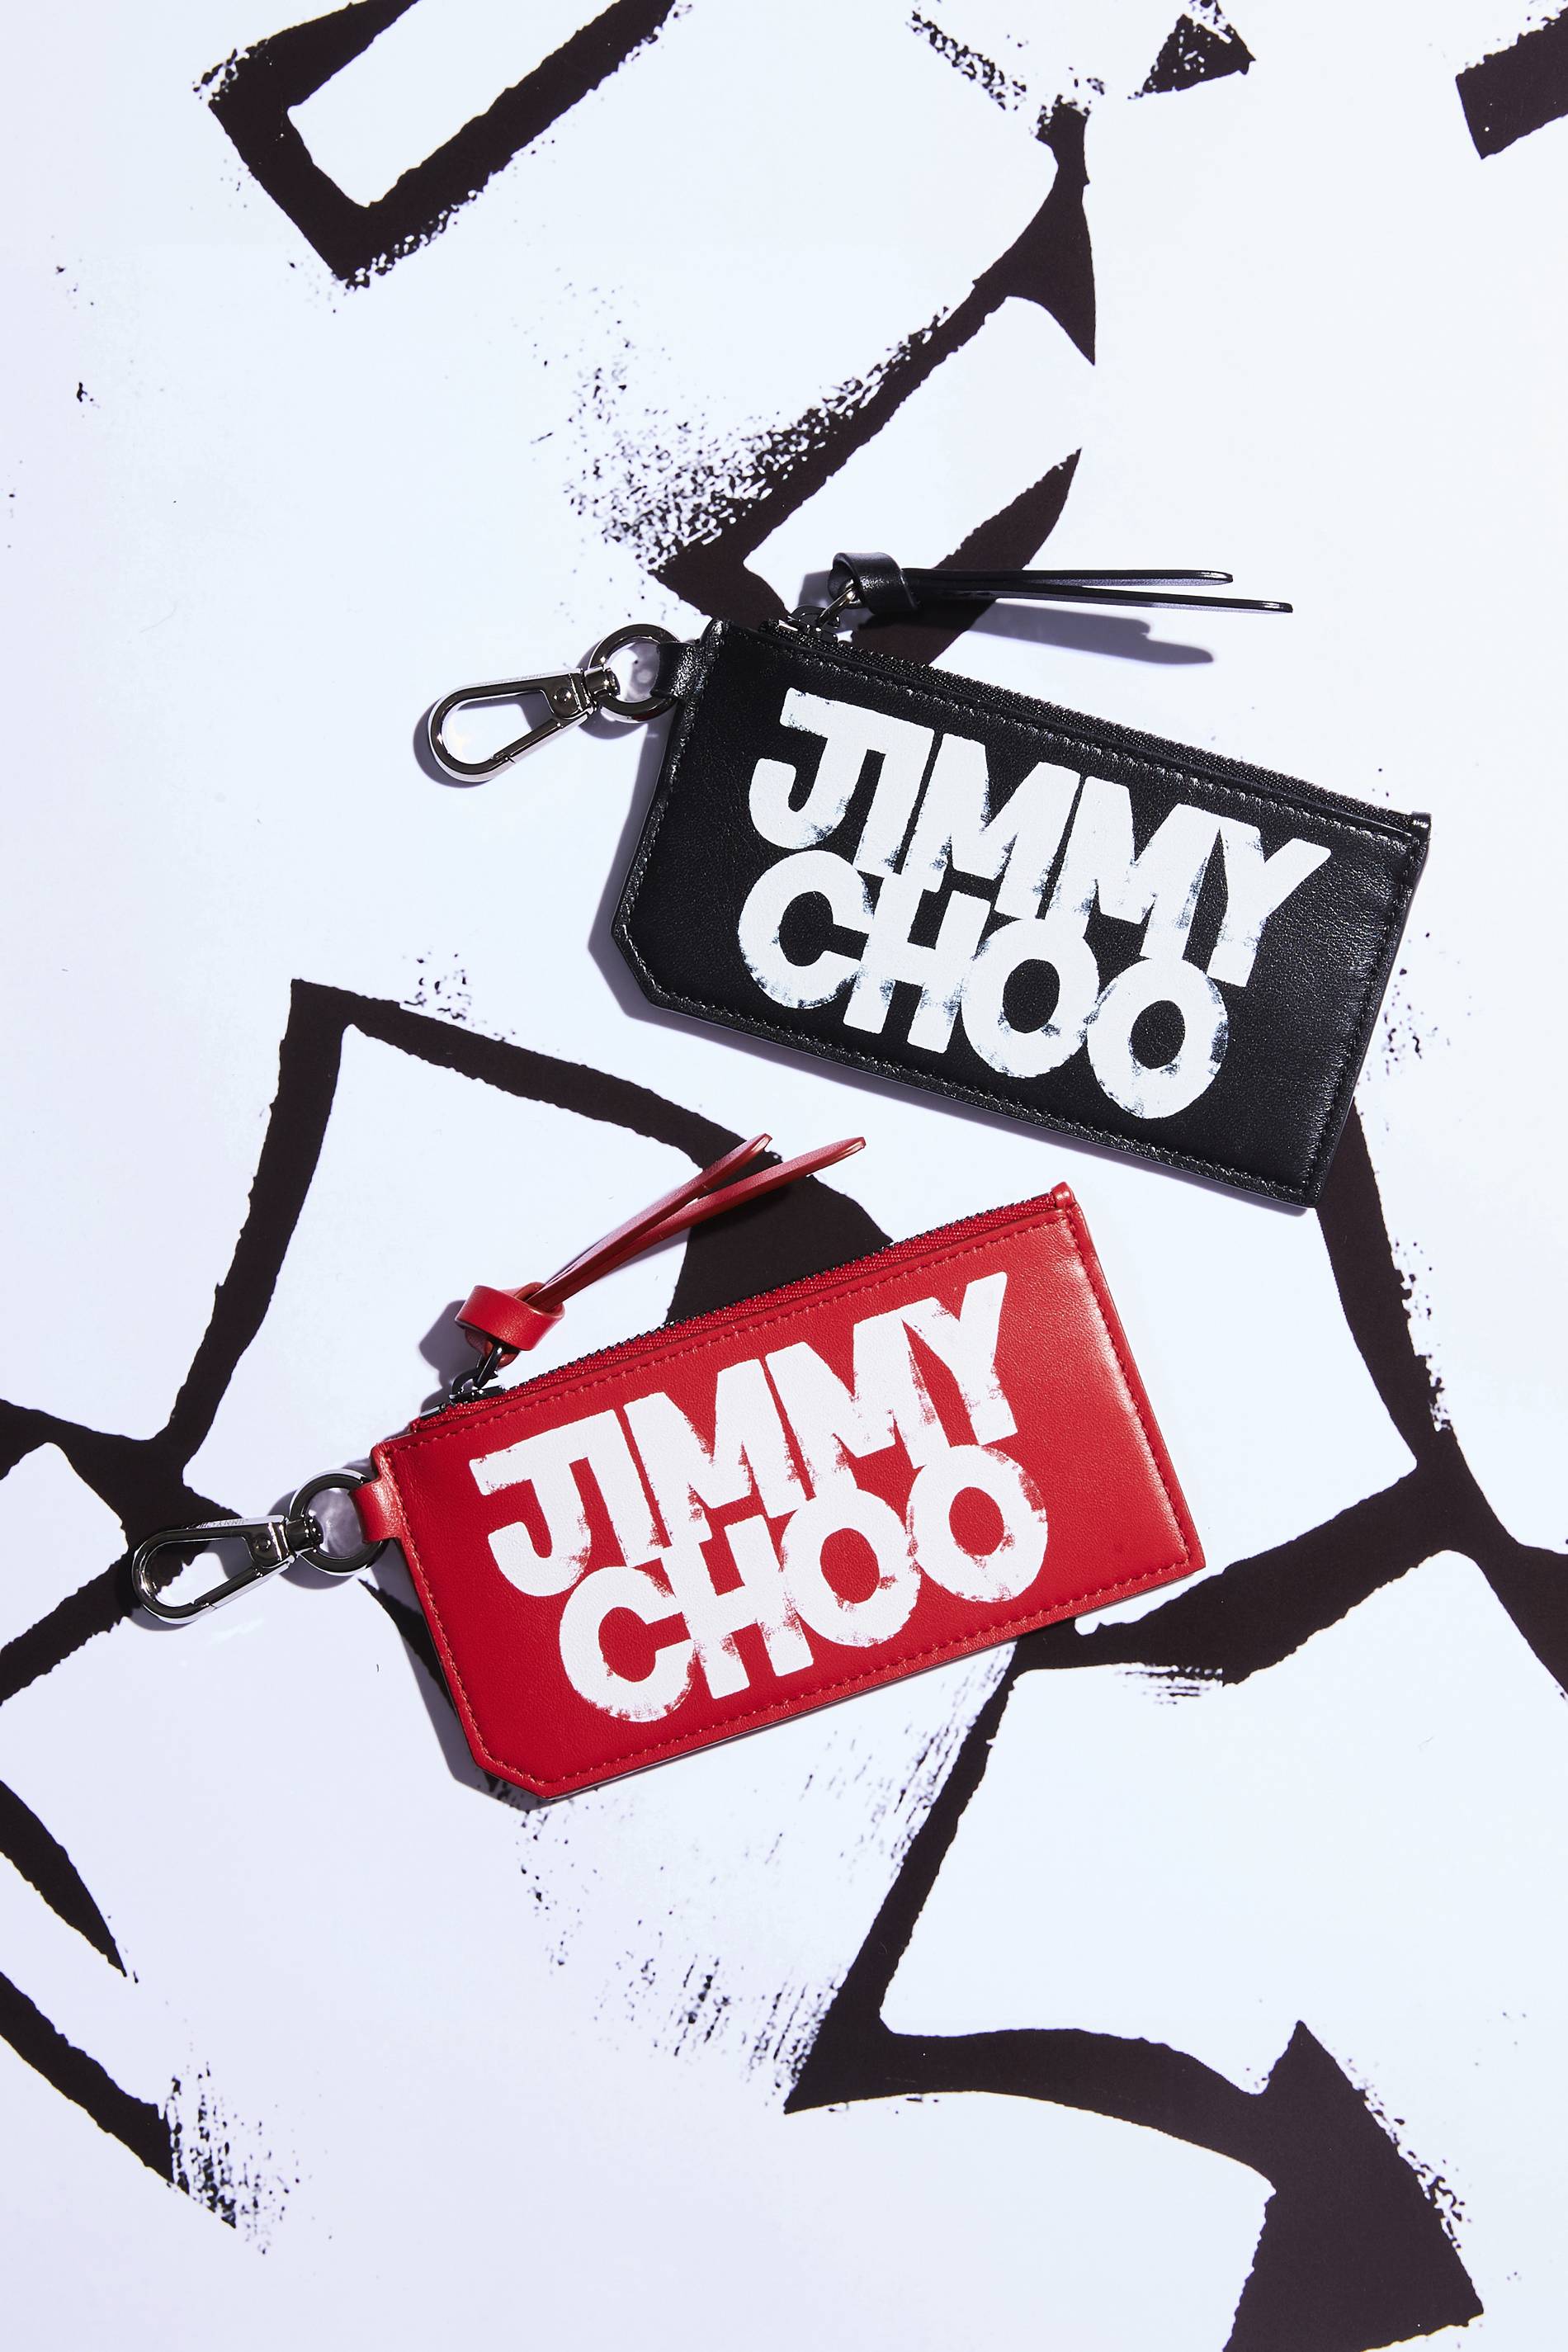 Jimmy Choo Teams with Eric Haze, Poggy NYC Collection